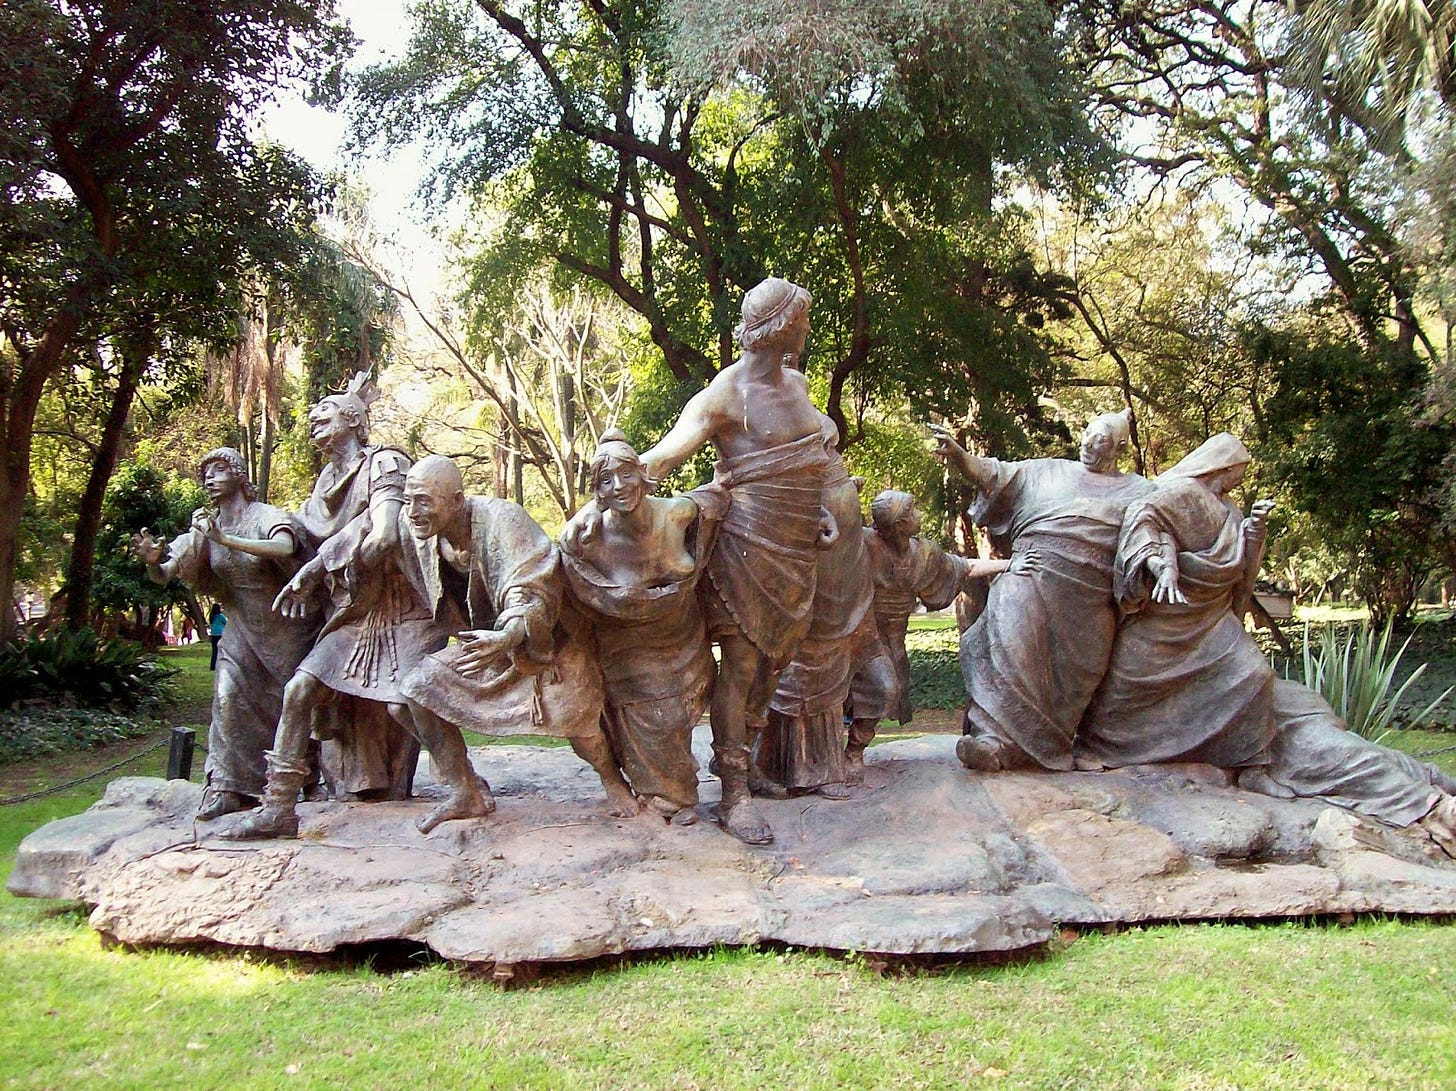 Saturnalia (1909) by Ernesto Biondi, in the Buenos Aires Botanical Gardens